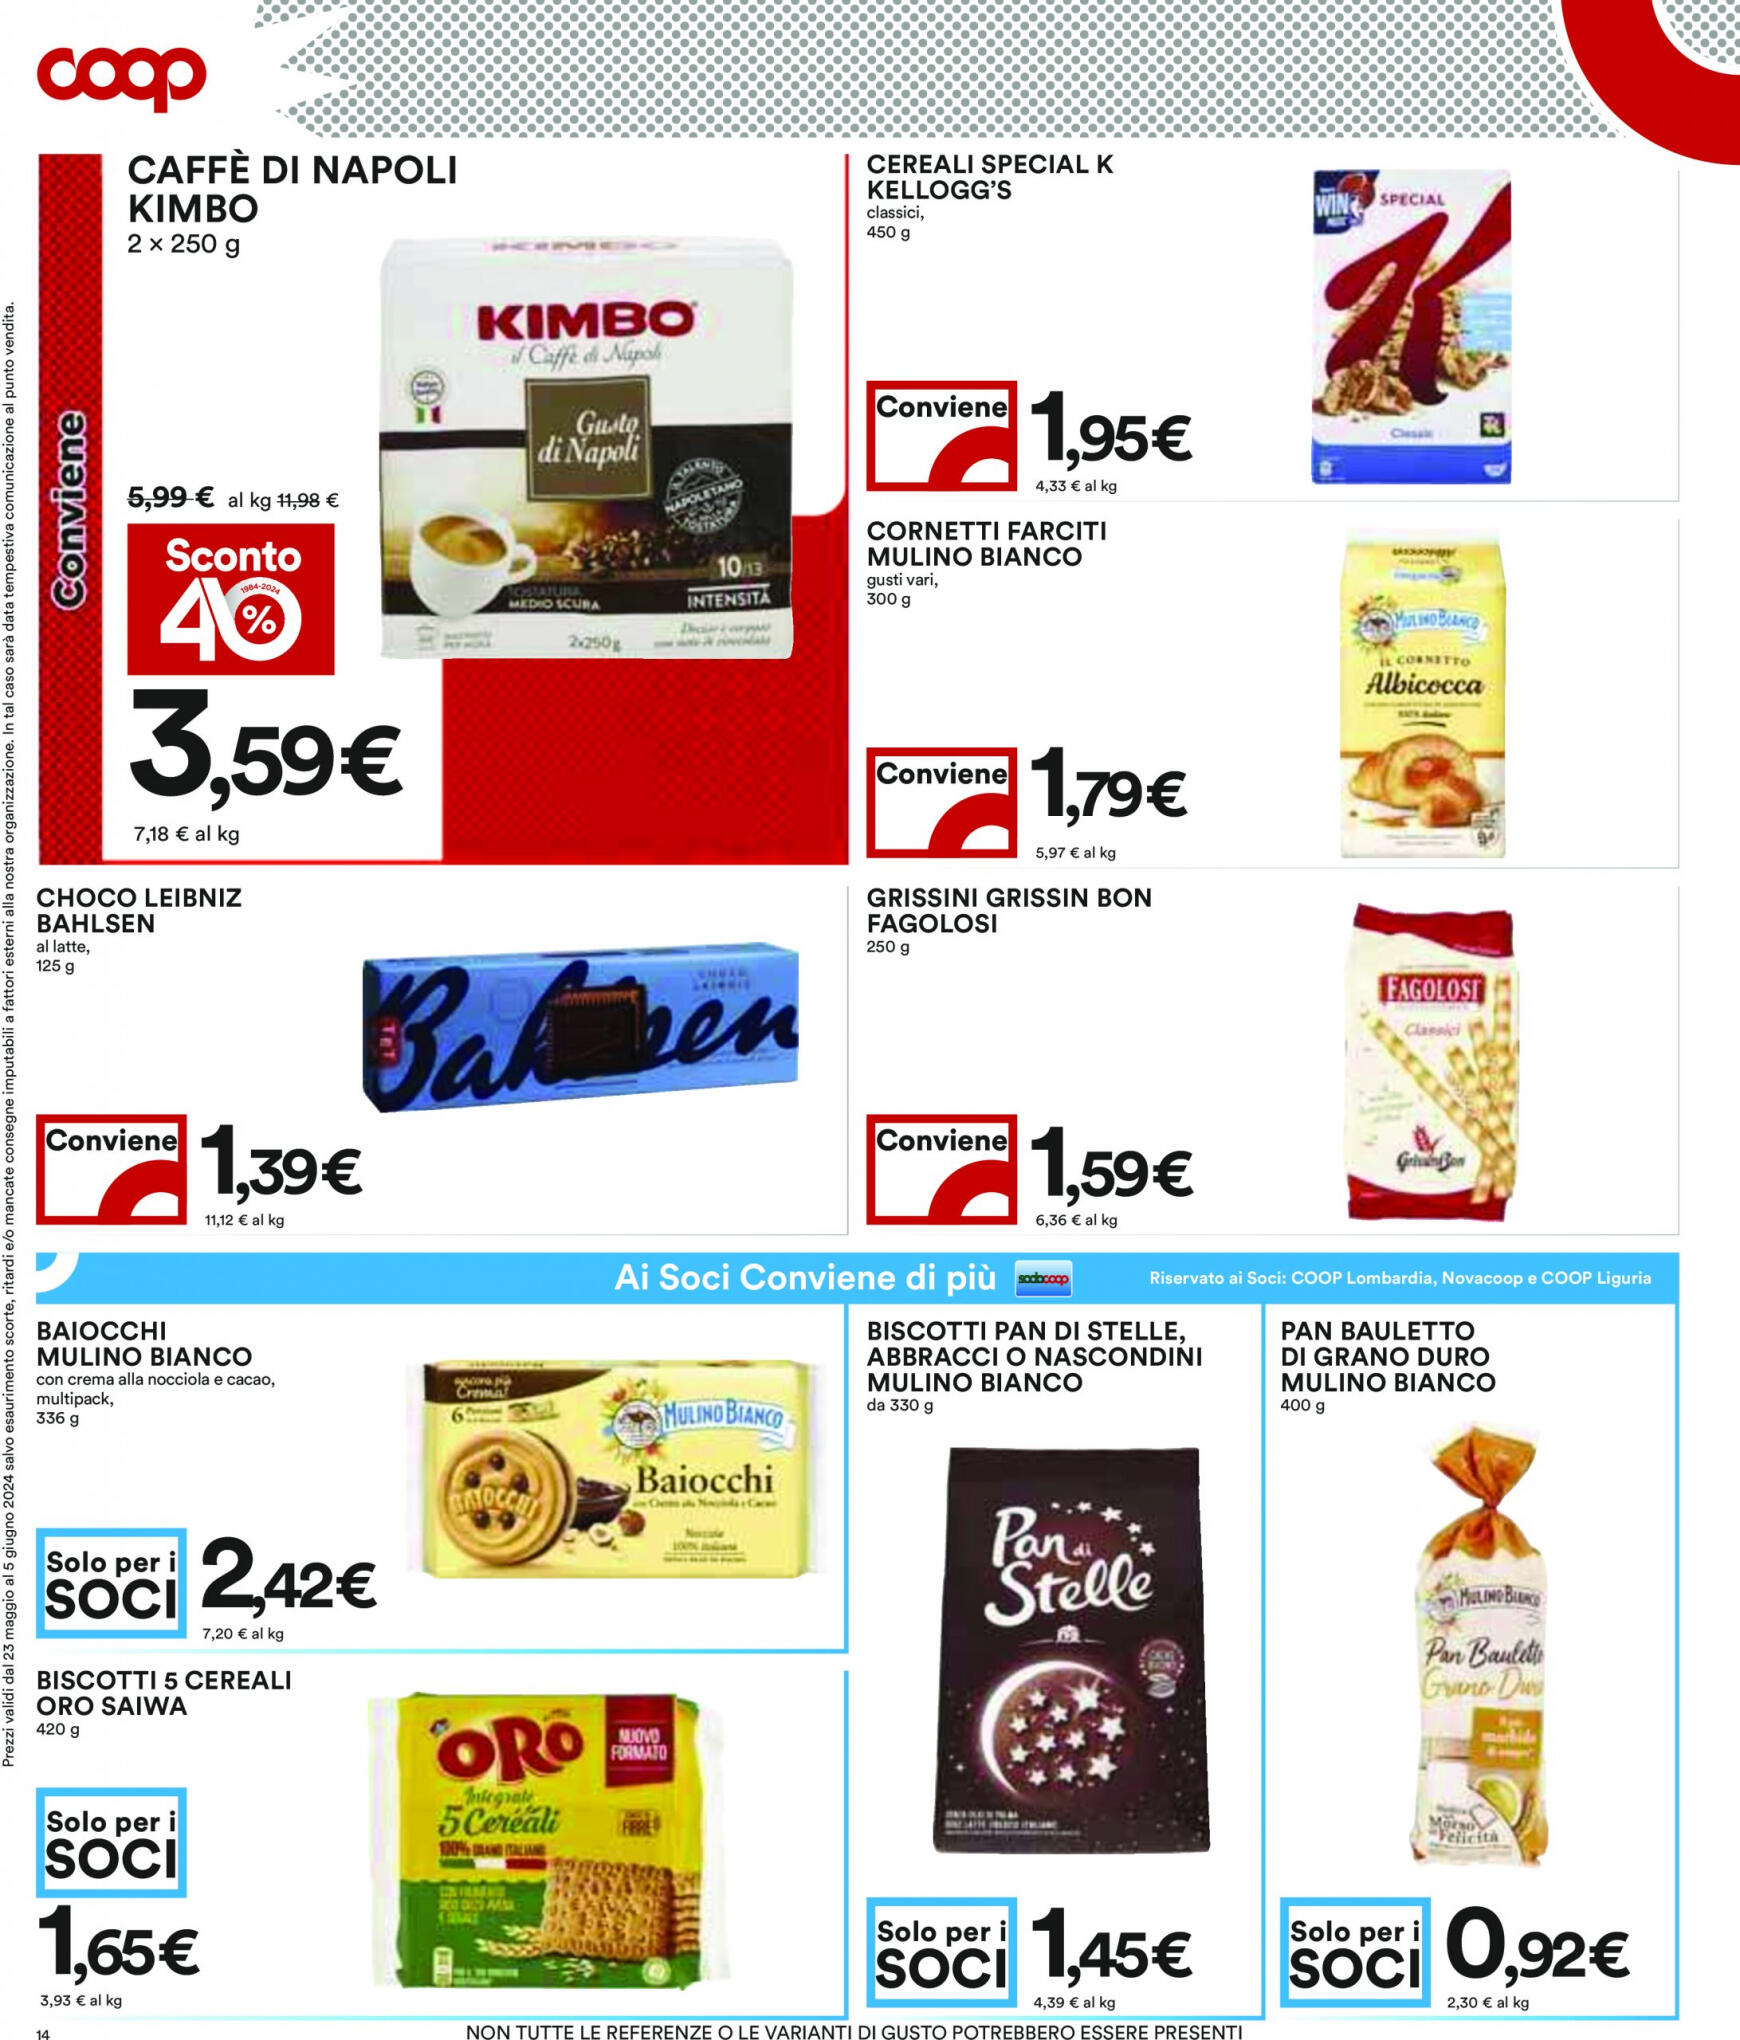 coop - Nuovo volantino Coop 23.05. - 05.06. - page: 14